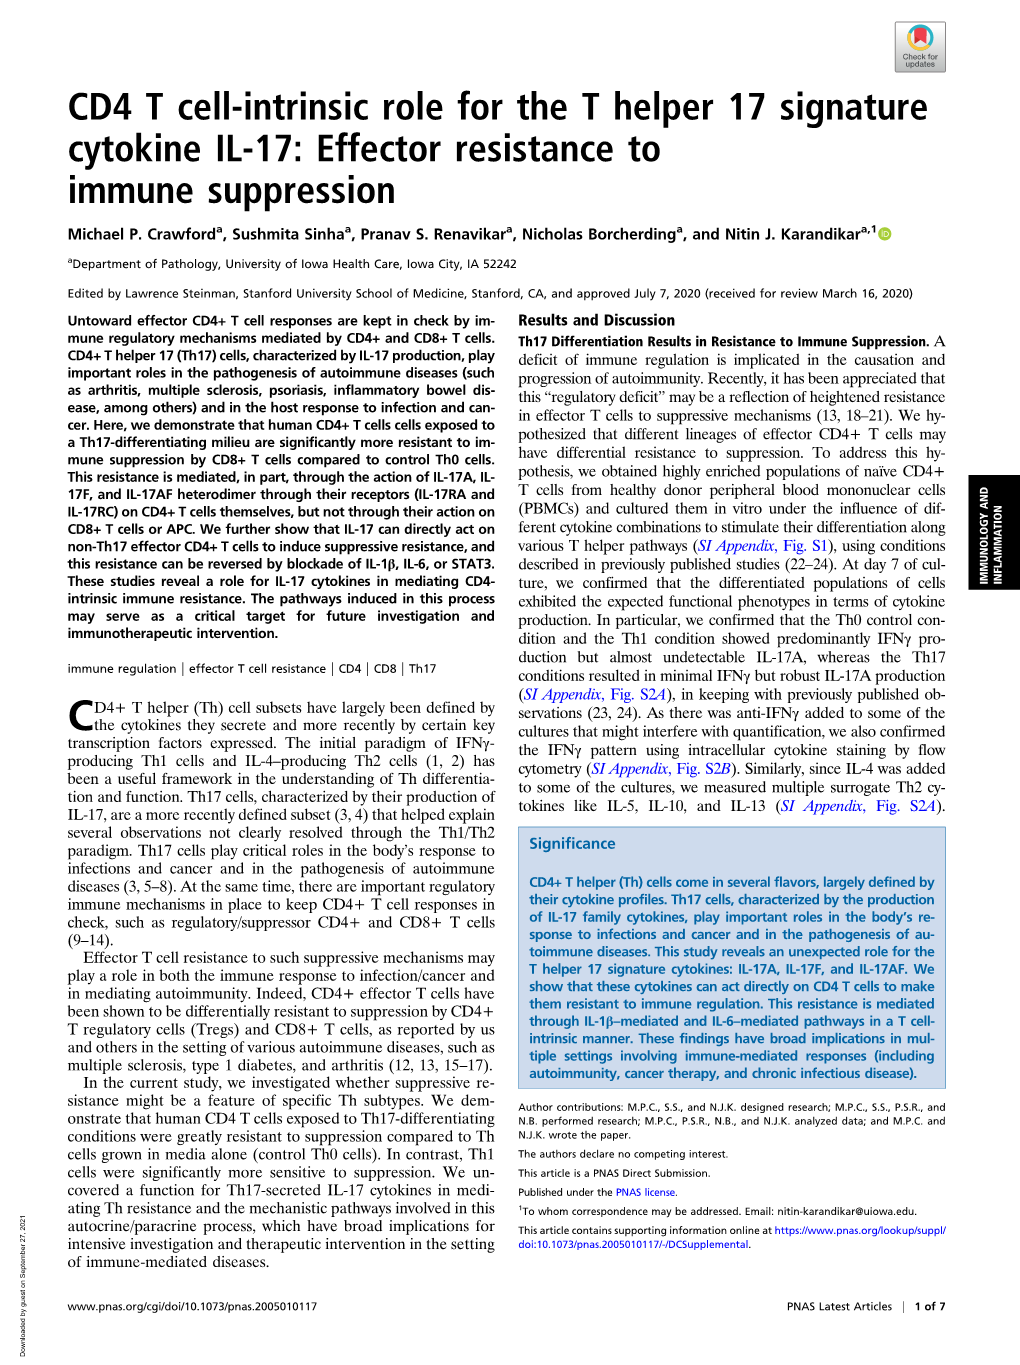 CD4 T Cell-Intrinsic Role for the T Helper 17 Signature Cytokine IL-17: Effector Resistance to Immune Suppression